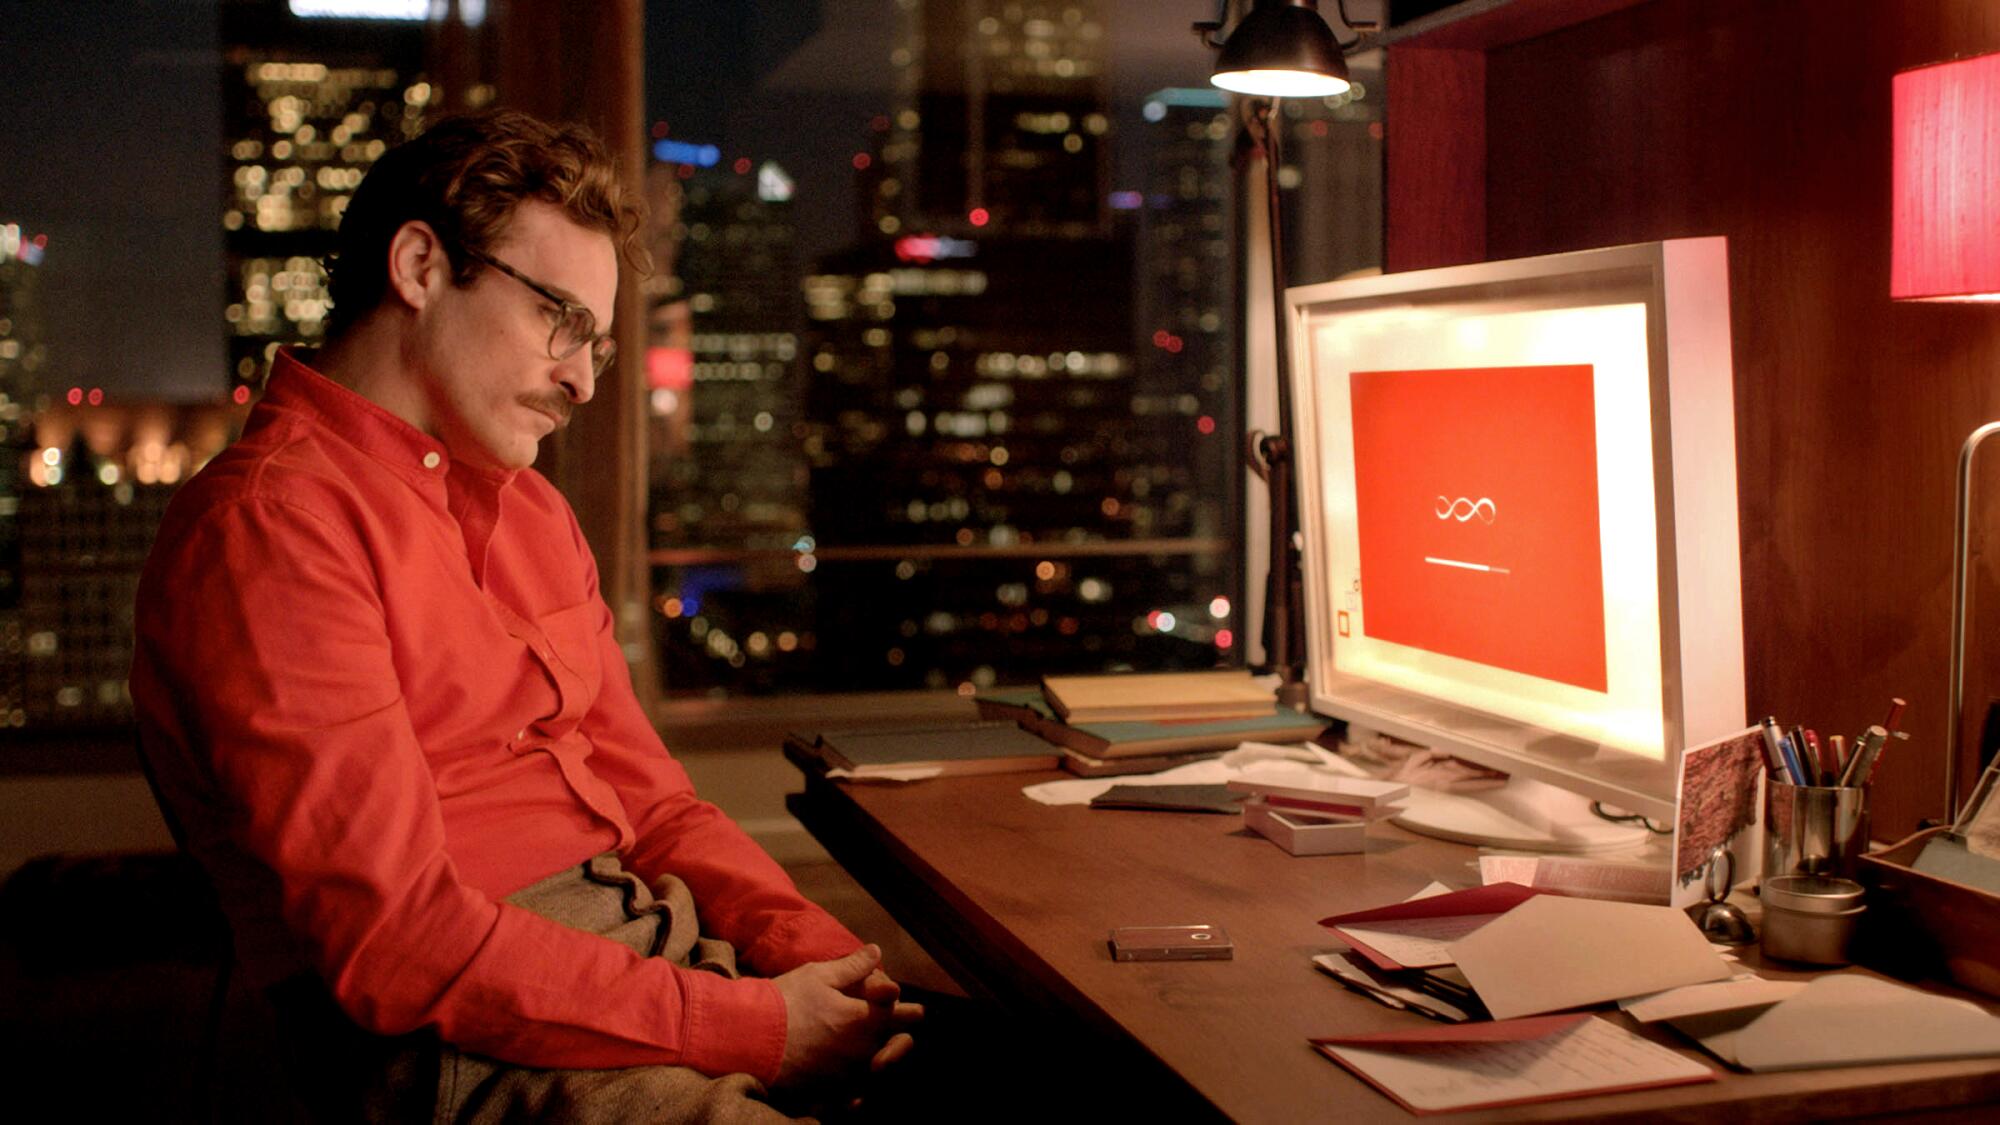 Joaquin Phoenix as Theodore in the movie "Her," sitting at computer desk. 